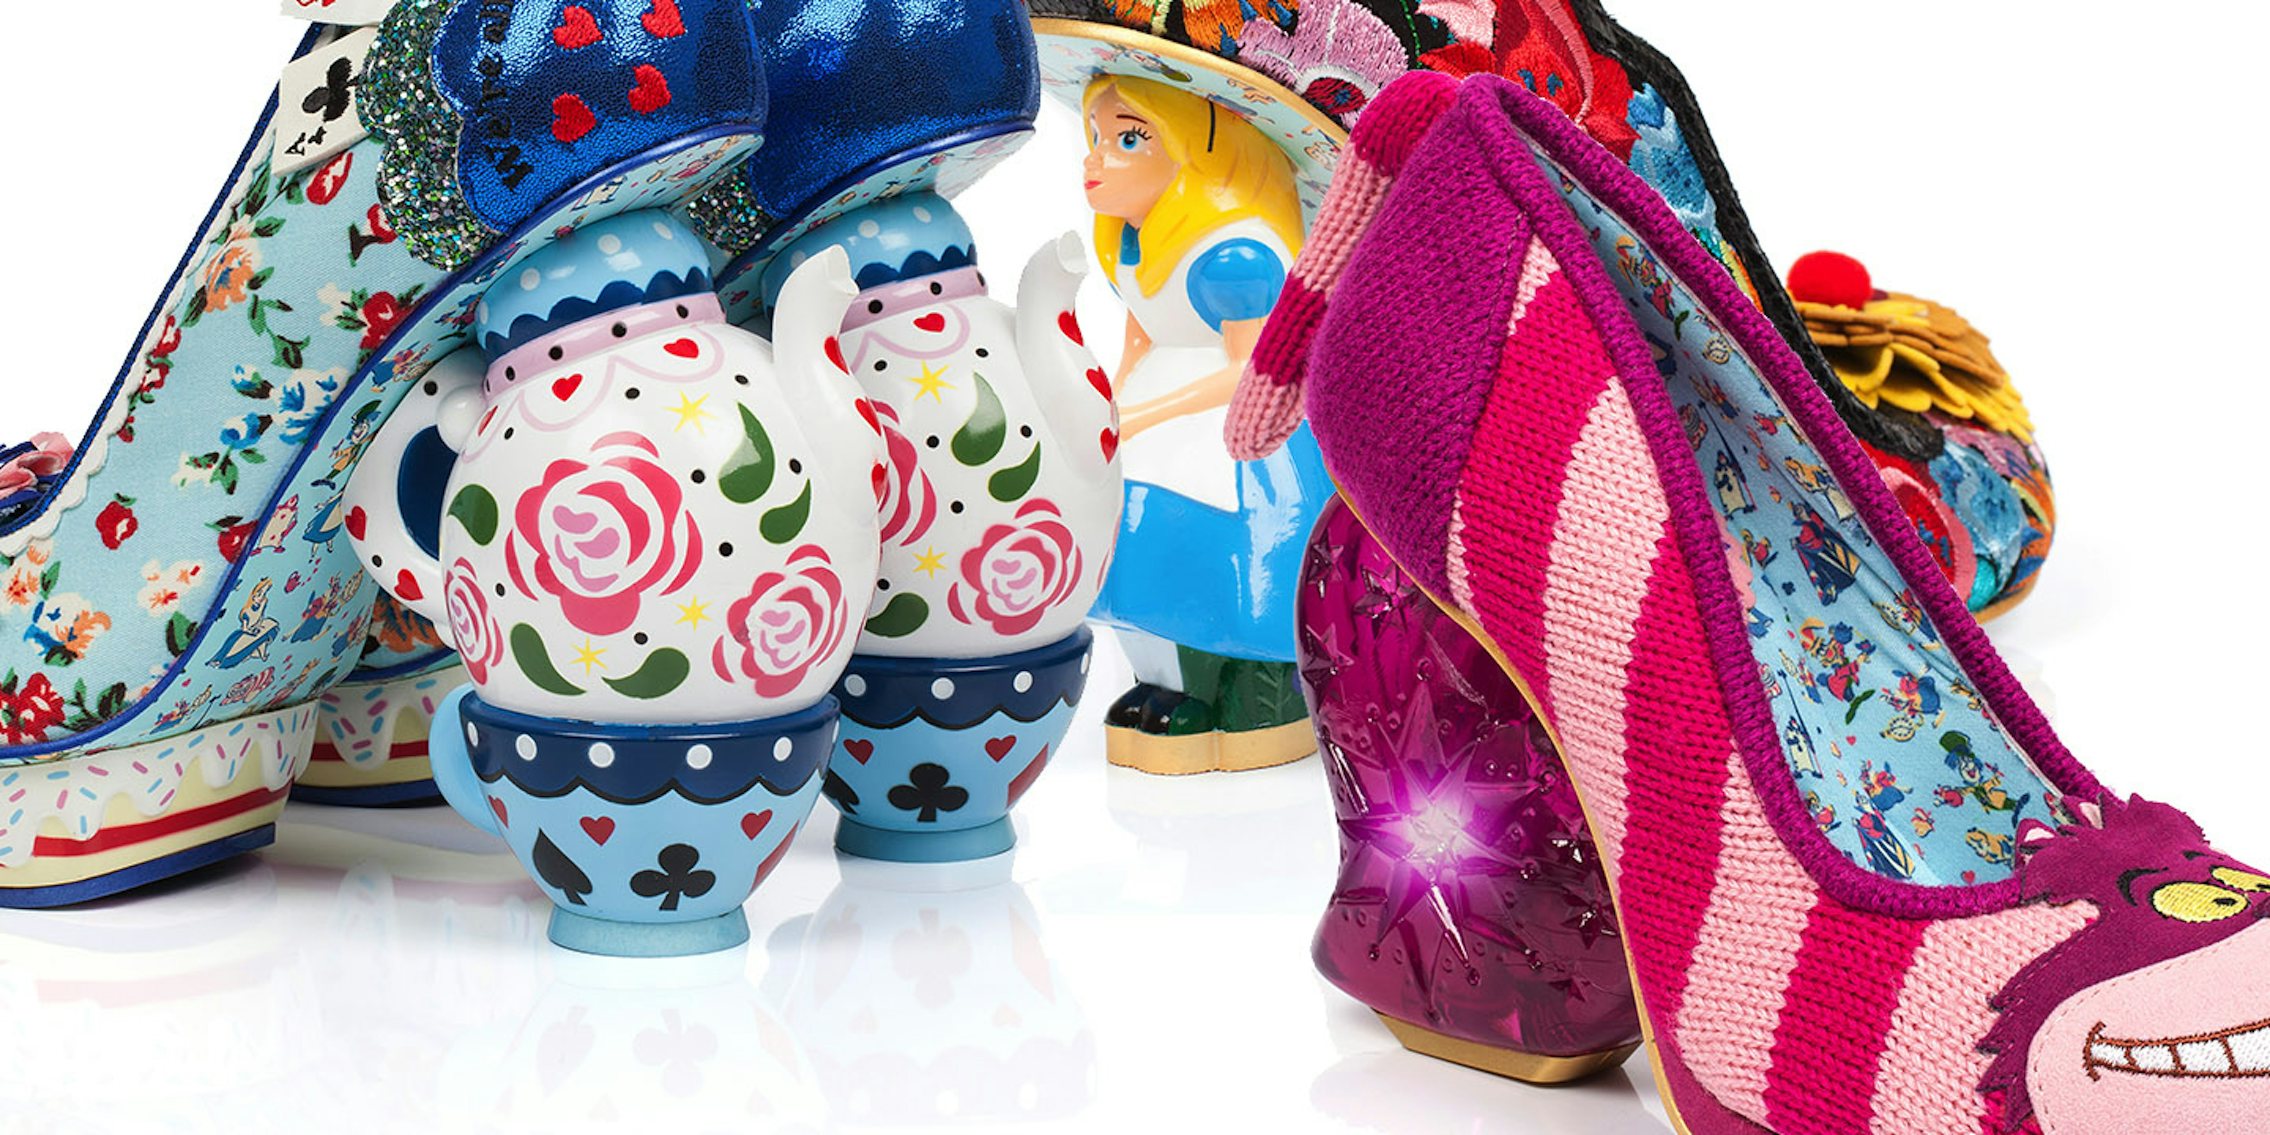 Take a trip to Wonderland with Irregular Choice's new Disney shoe  collection - The Daily Dot